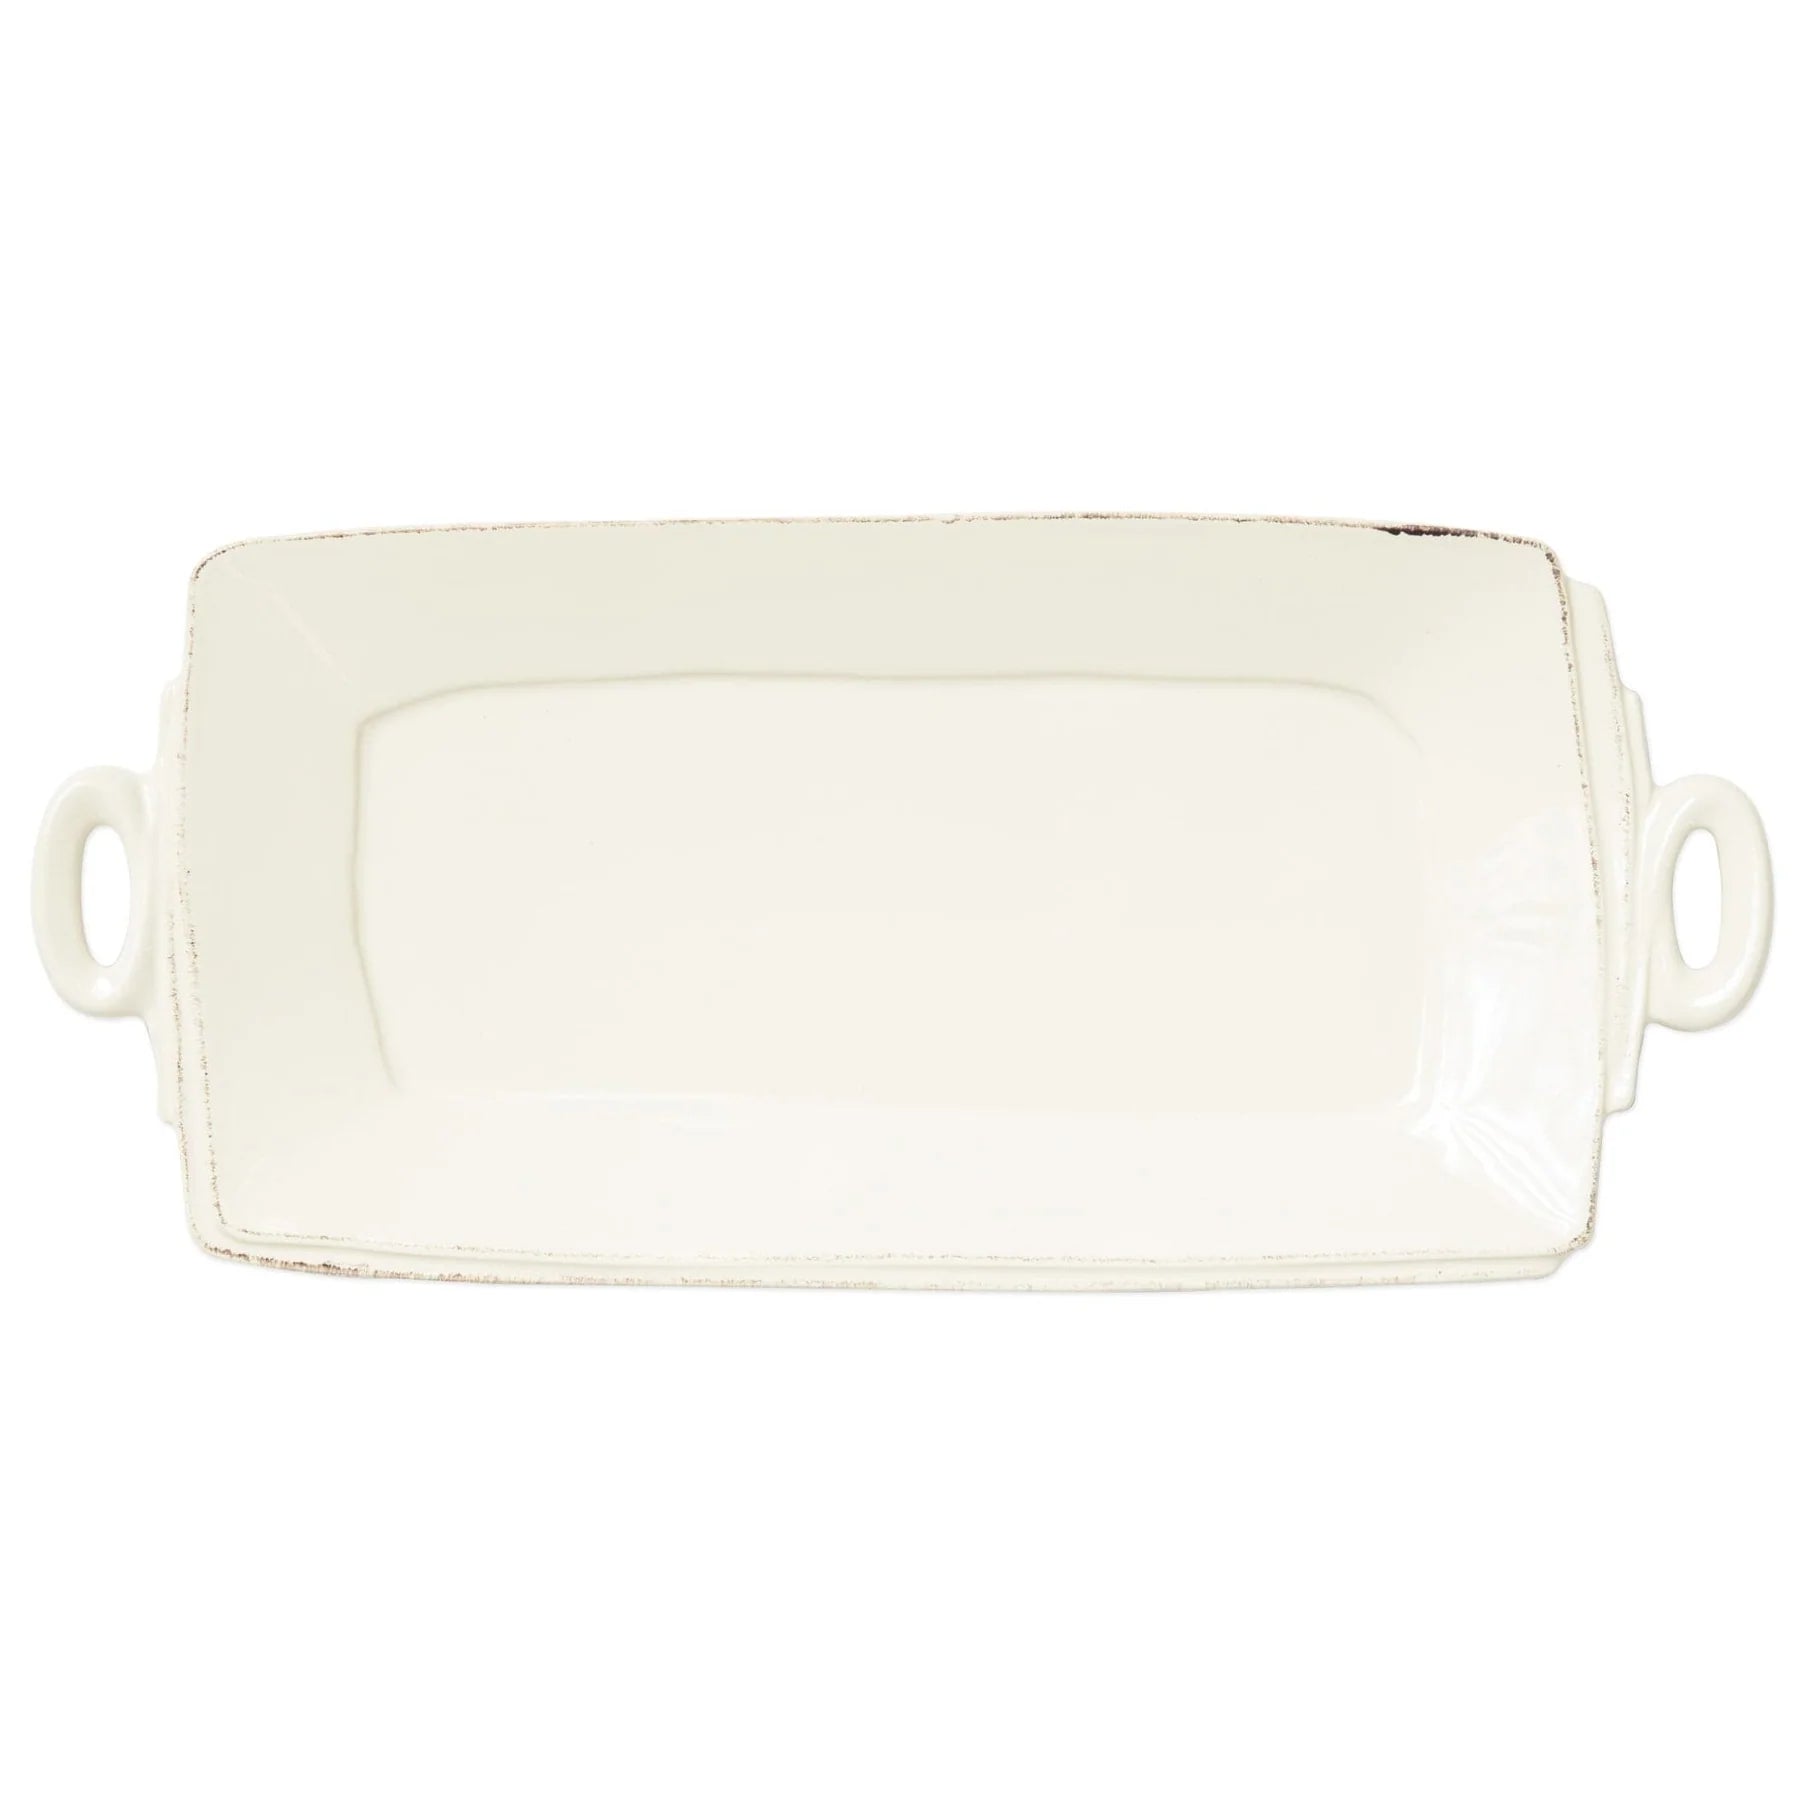 Vietri Lastra Linen colored rectangle with handles on a white background